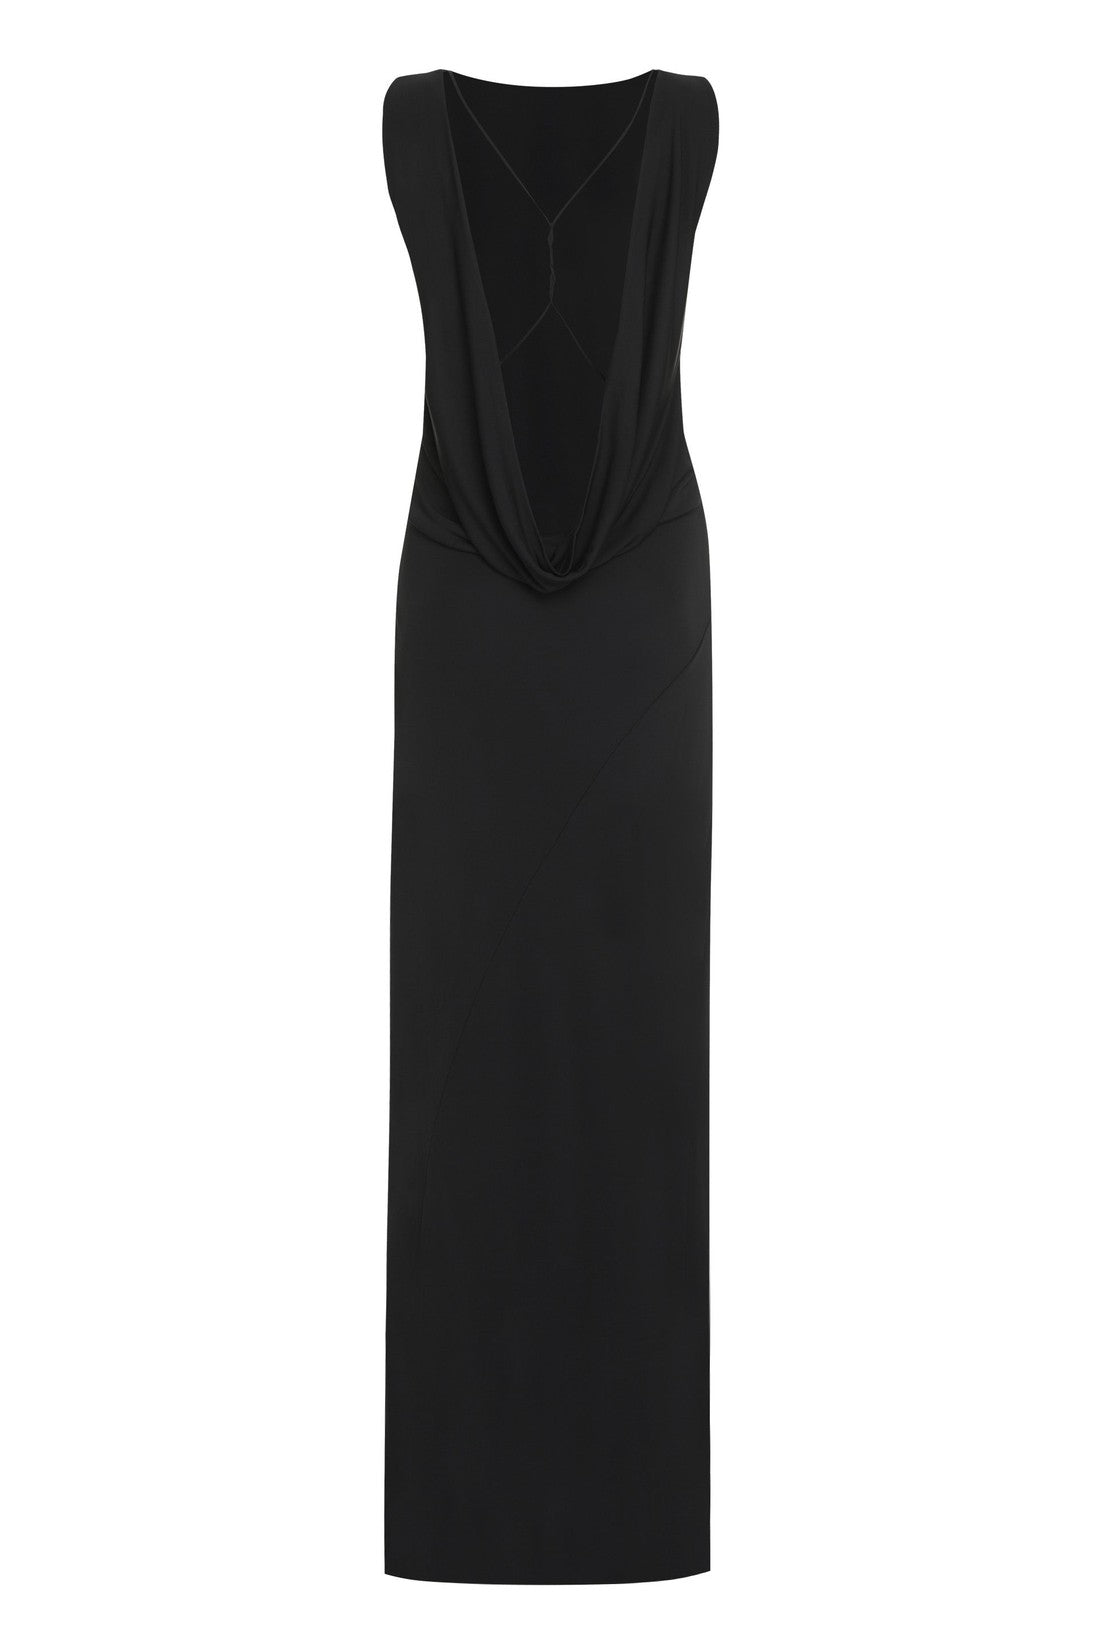 CALVIN KLEIN-OUTLET-SALE-Knitted maxi dress-ARCHIVIST